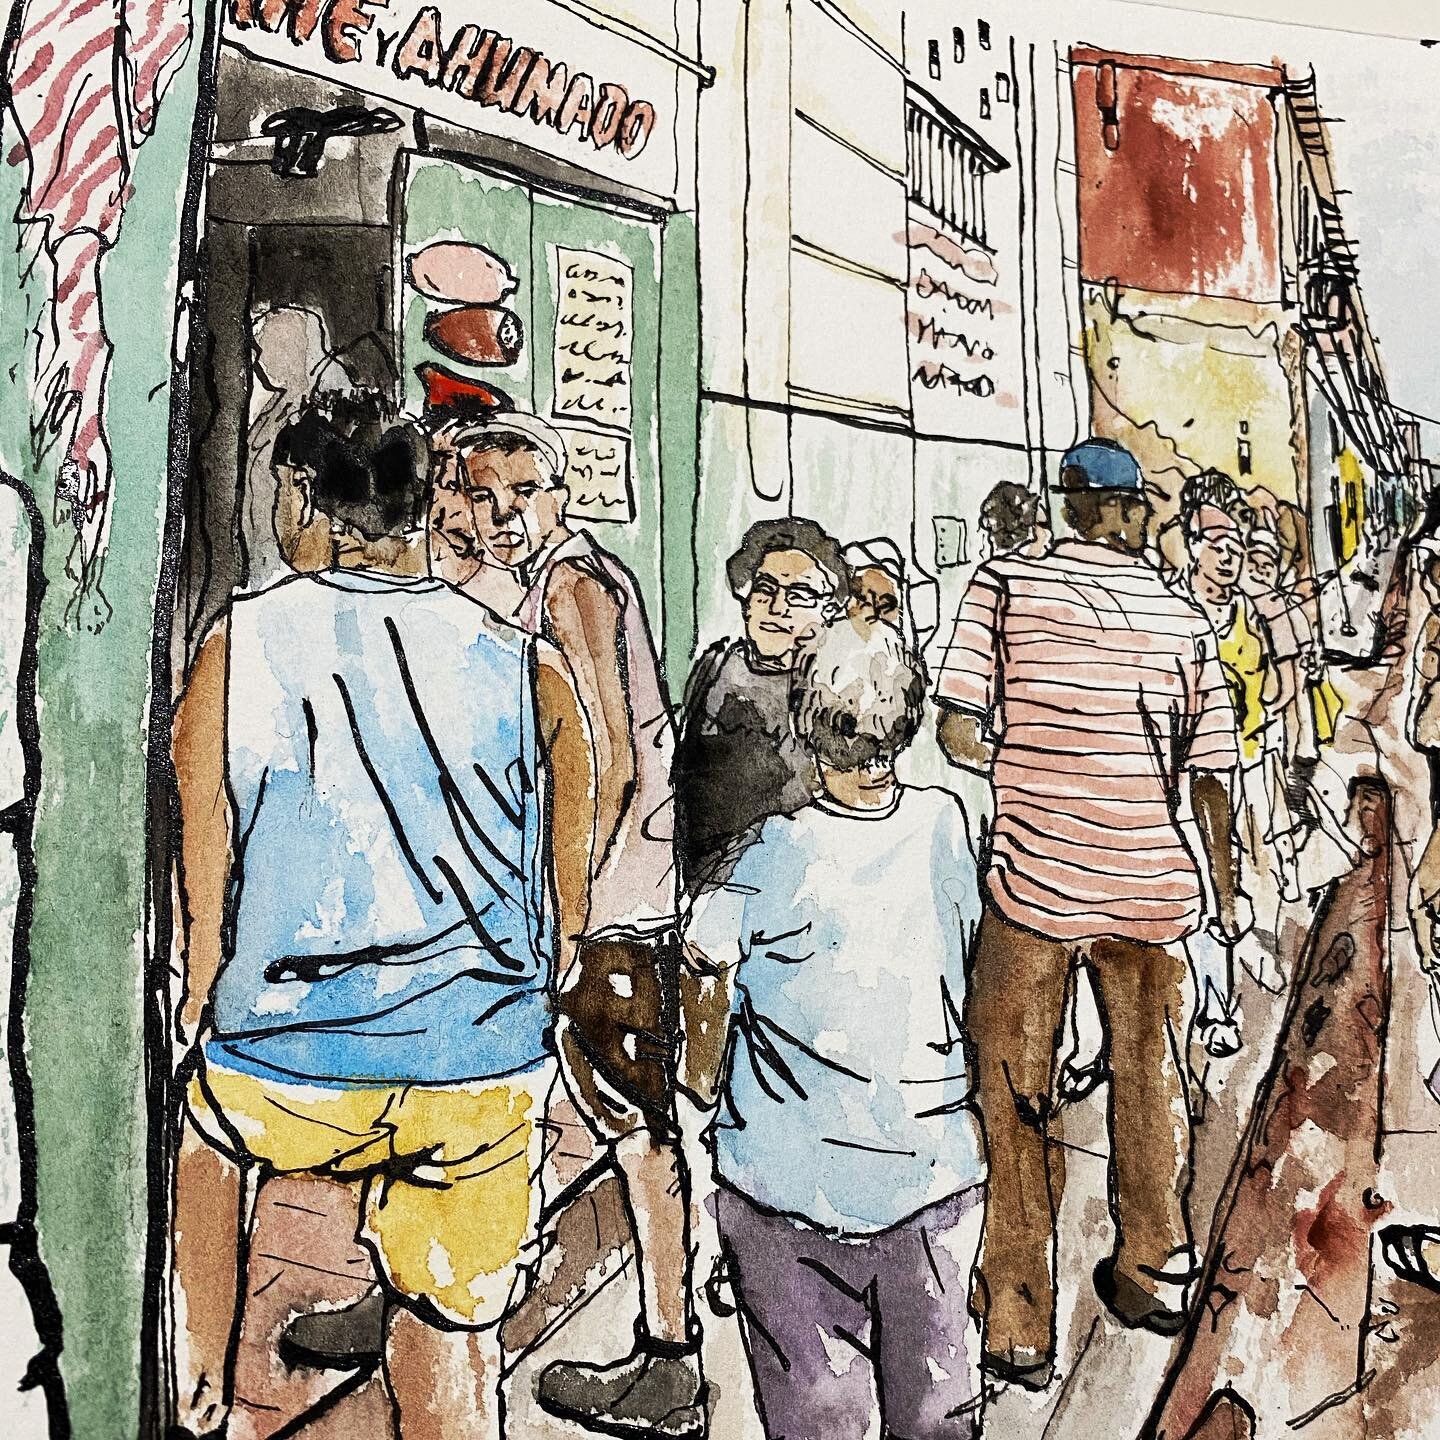 Decided to finally add some colour to this sketch. Queue for the butchers in Cuba just after they got their delivery 🇨🇺
.
.
.
.
.
.
.
.
#cuba #cubatravel #drawings #sketchbook #inkdrawing #reportage #cuban #butchers #streetstyle #streetphotography 